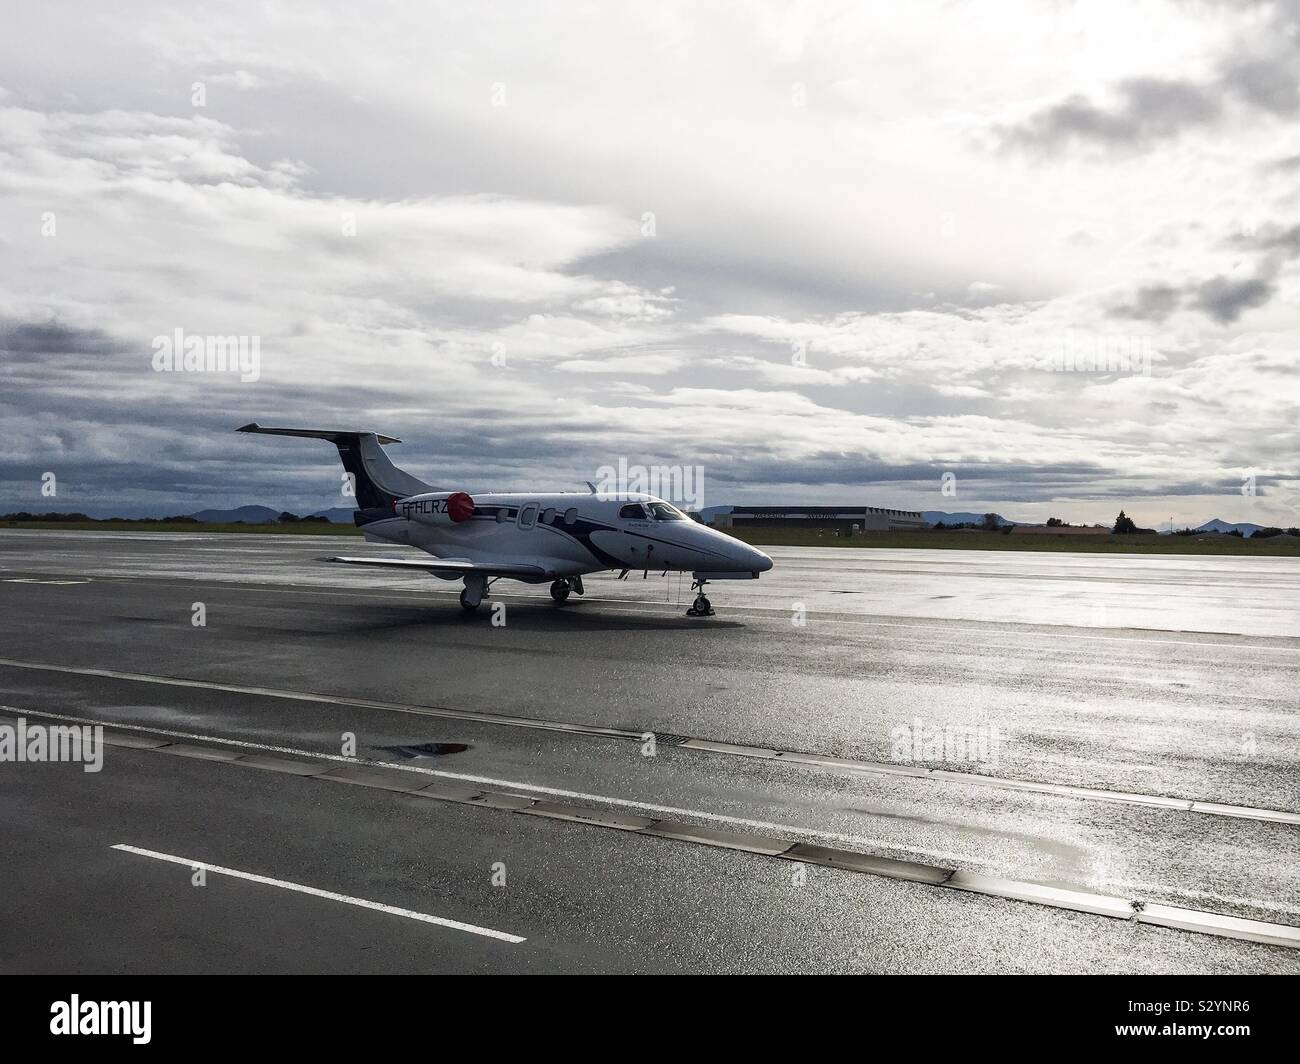 Embraer Phenom 100 private jet at Biarritz airport, France. Stock Photo